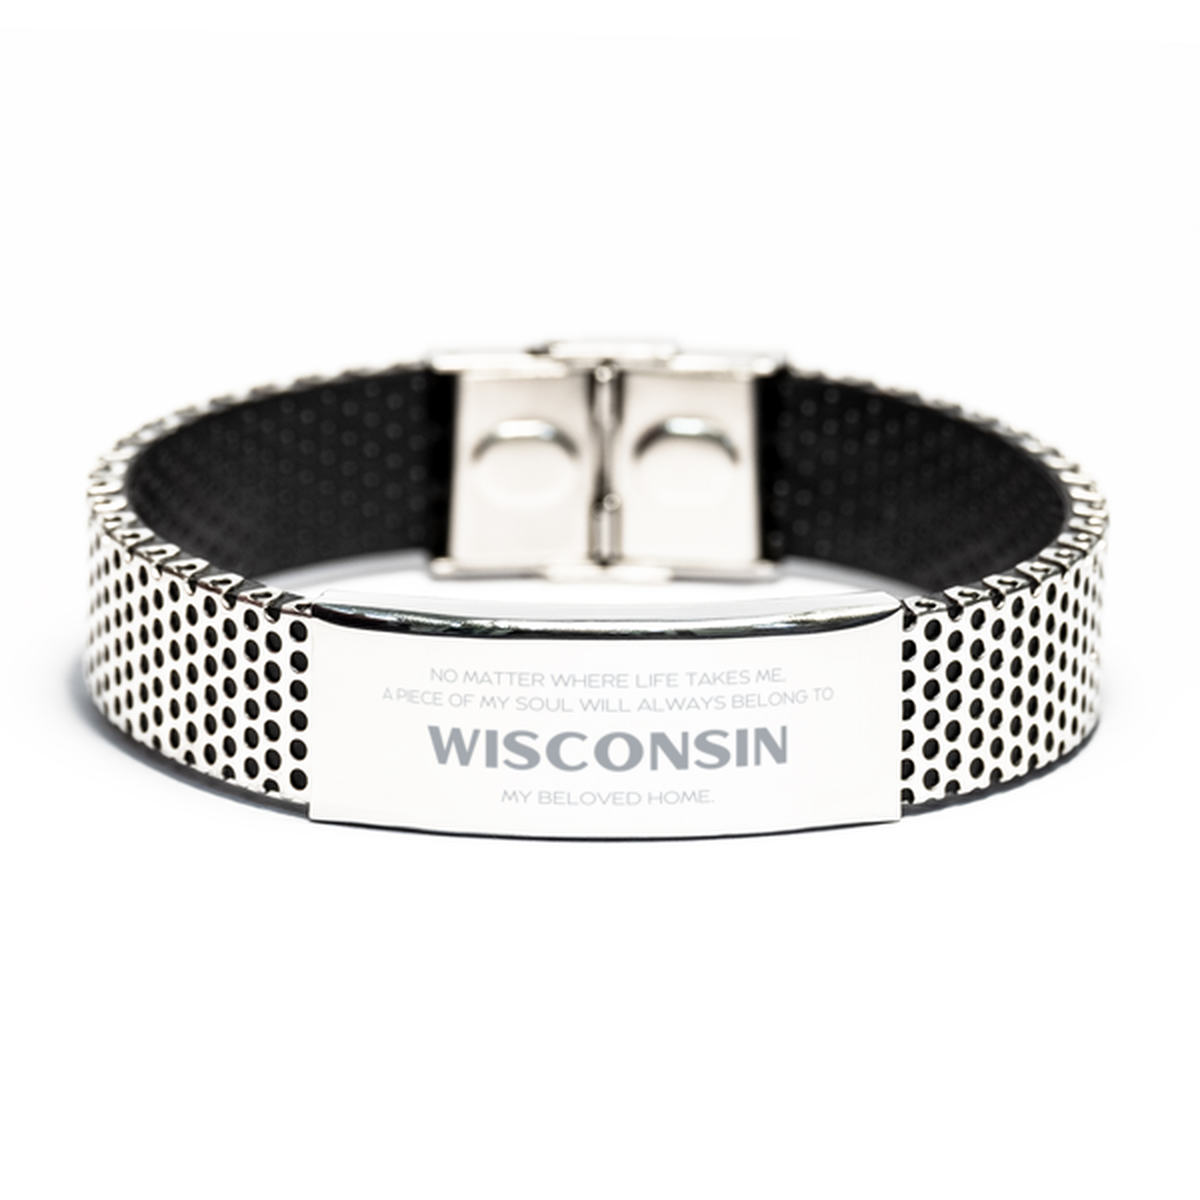 Love Wisconsin State Gifts, My soul will always belong to Wisconsin, Proud Stainless Steel Bracelet, Birthday Unique Gifts For Wisconsin Men, Women, Friends